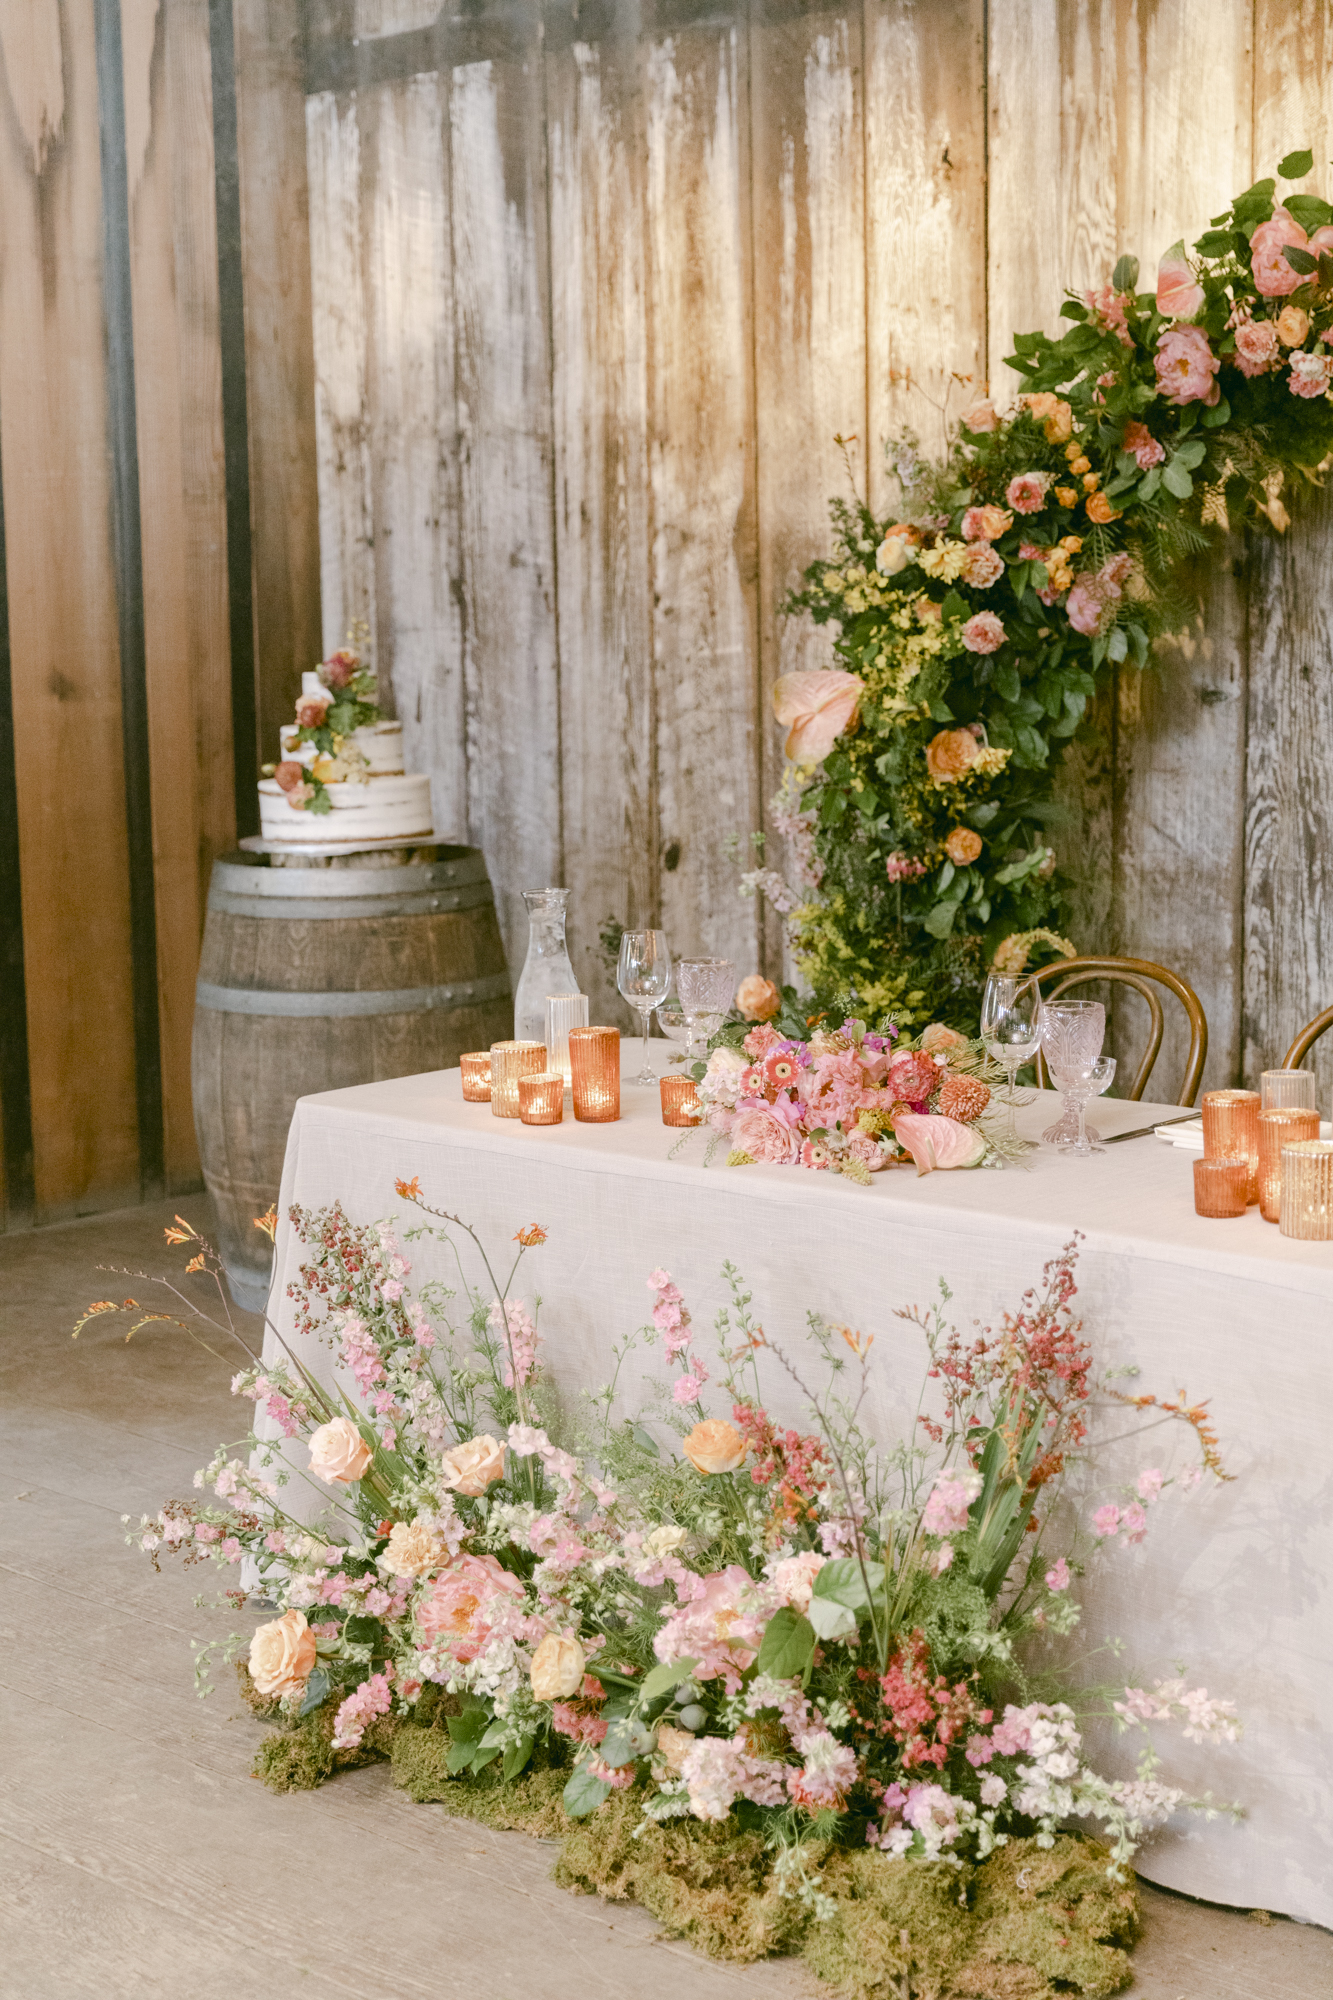 repurposing wedding ceremony florals at the reception table.